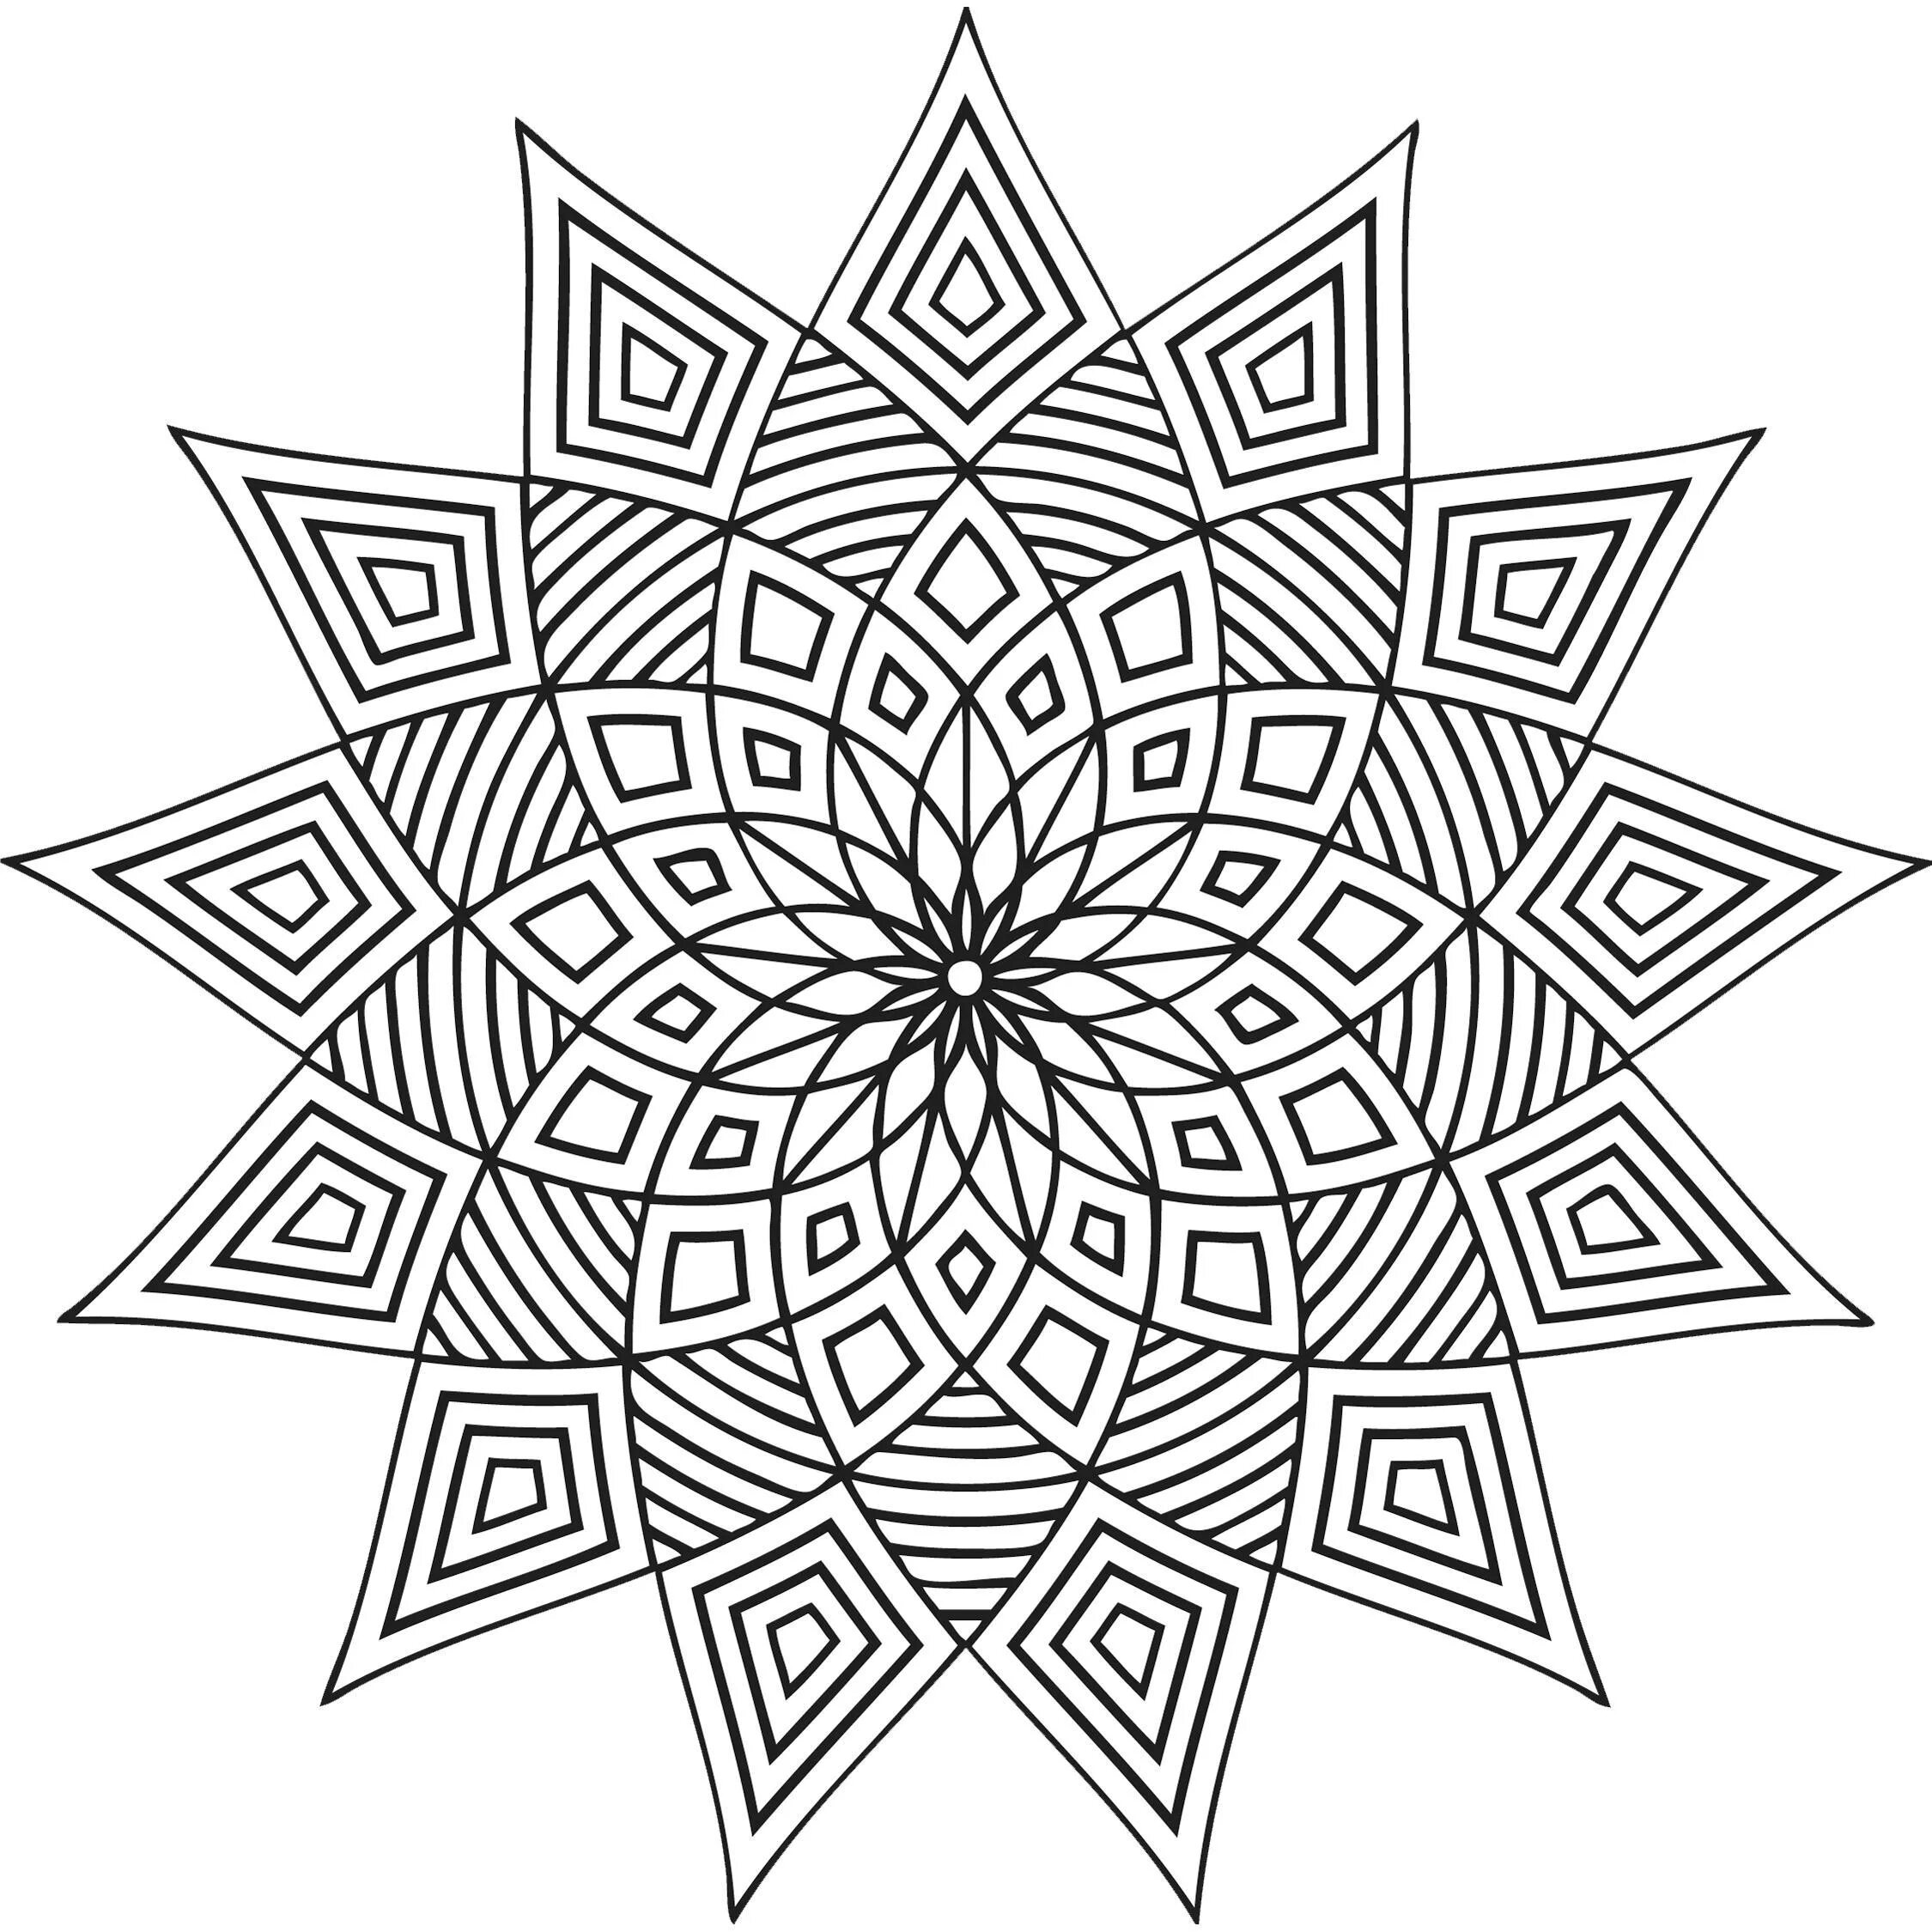 Coloring page with a playful geometric pattern